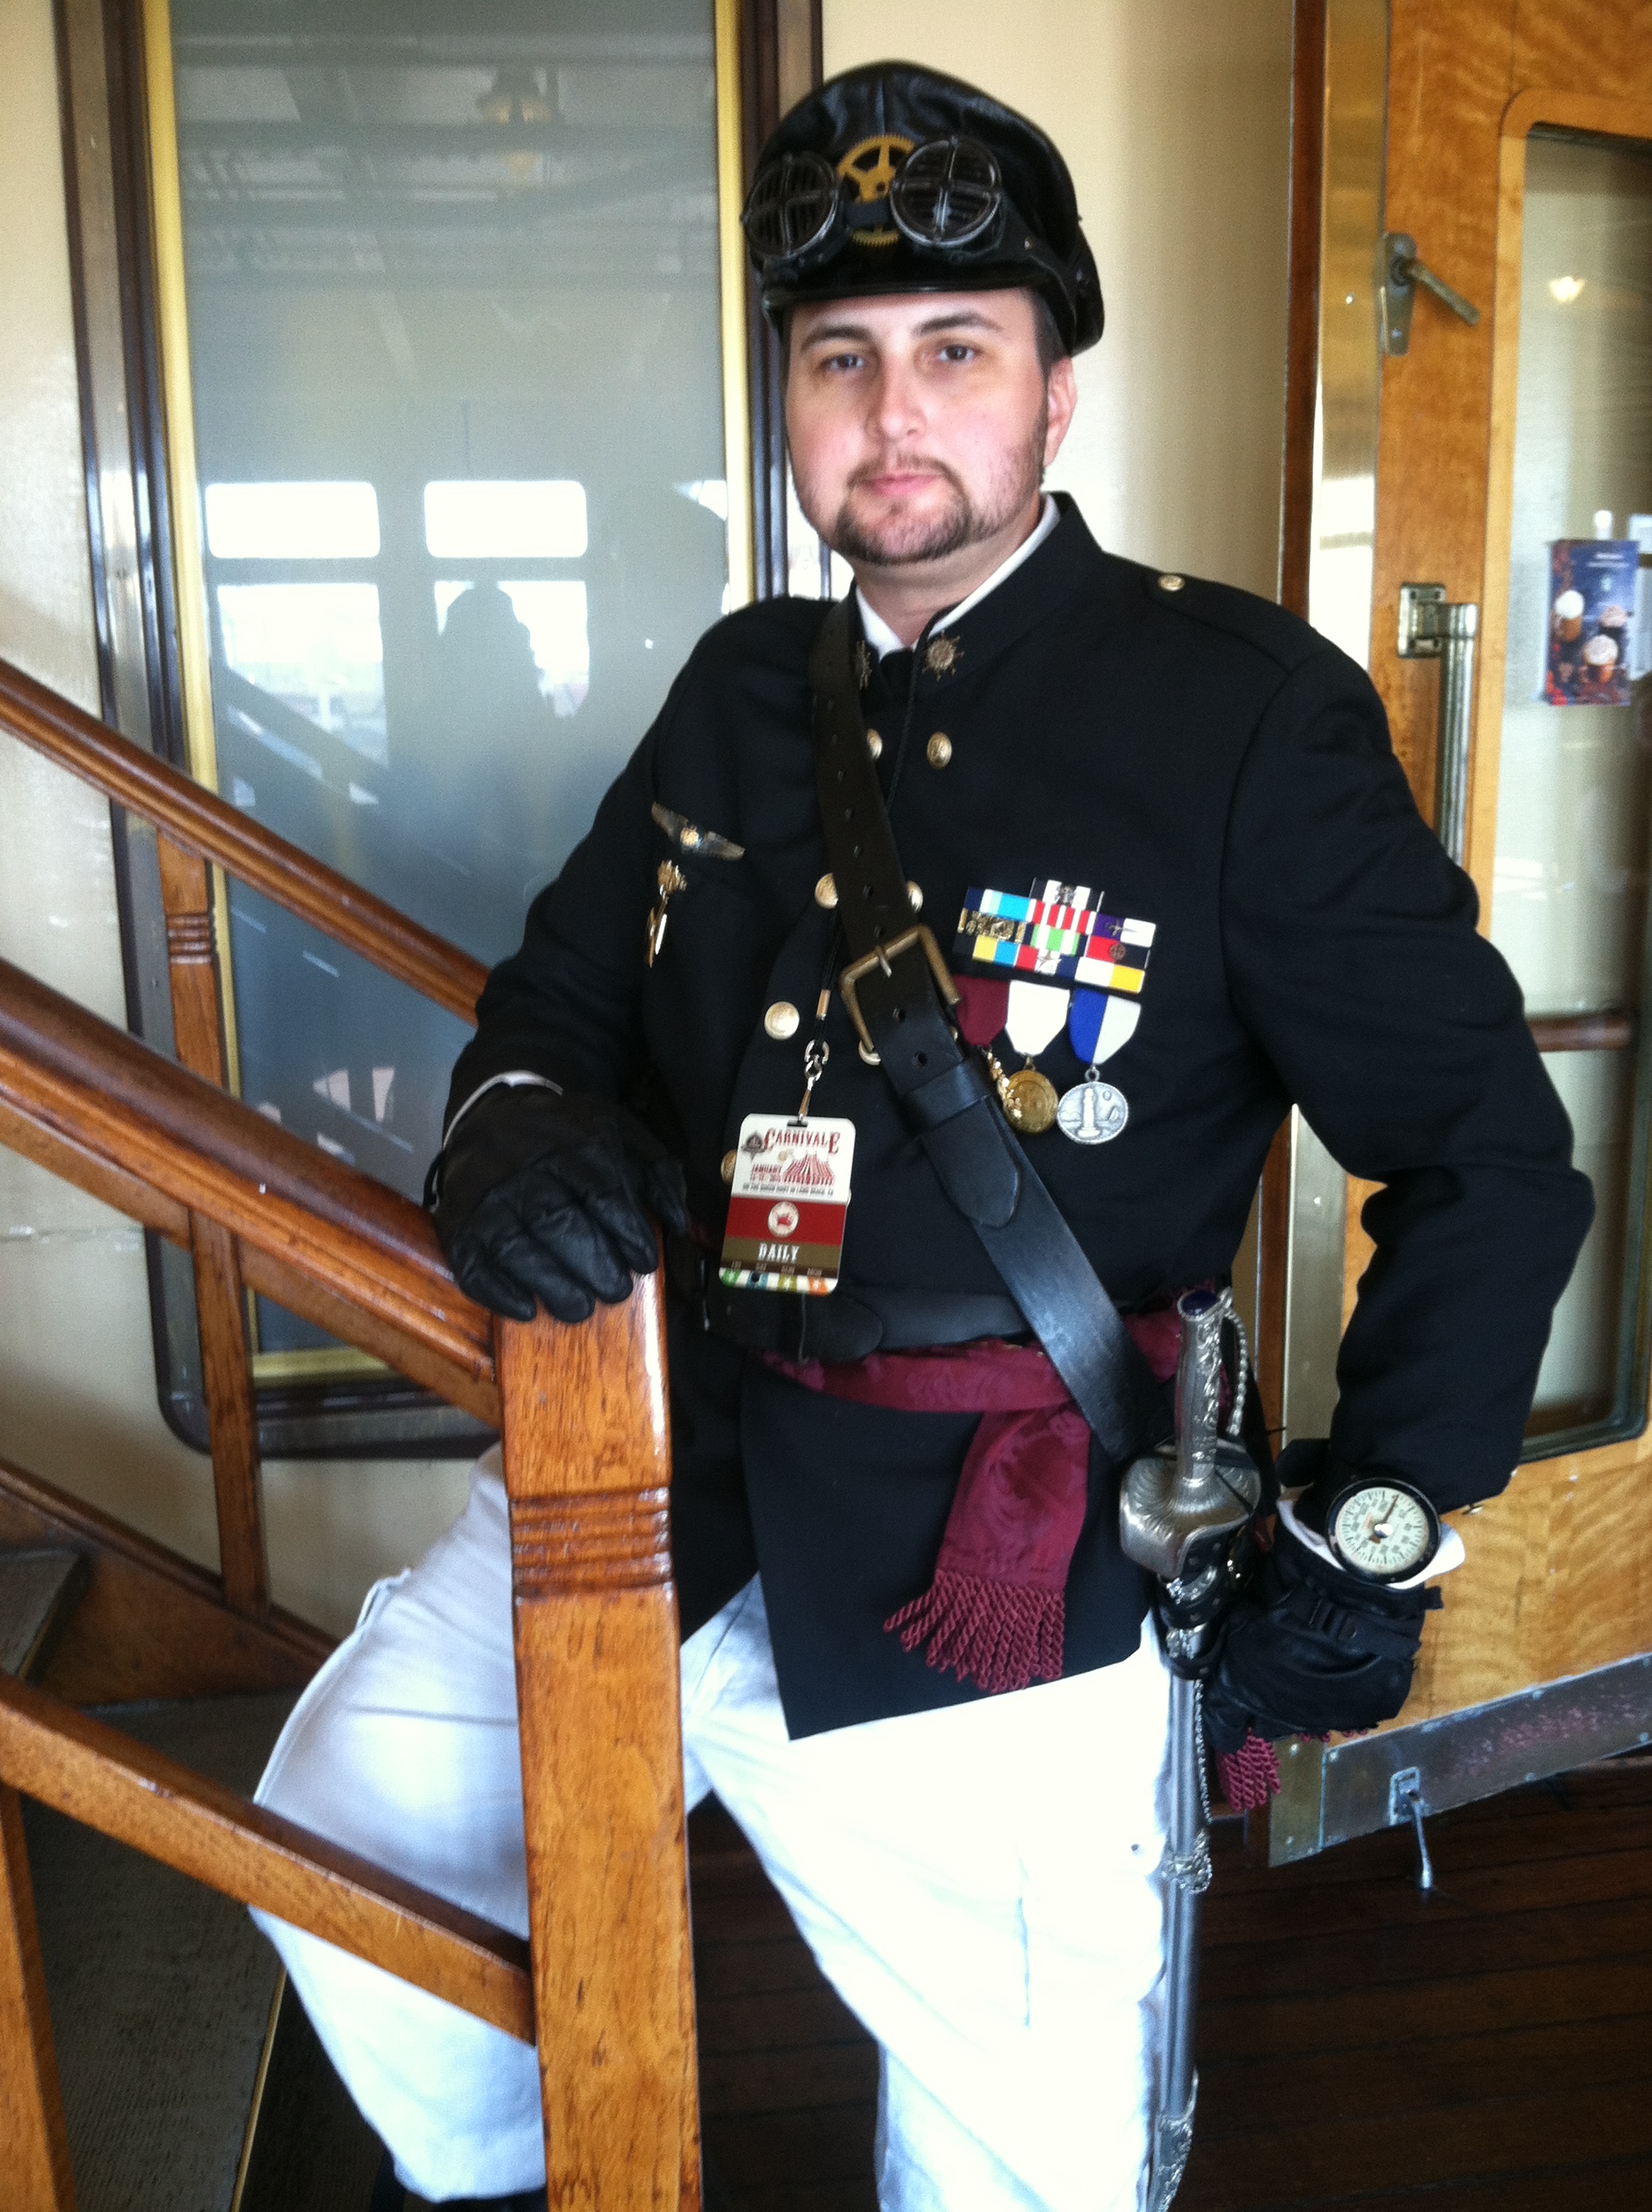 Valiant as a Sea/Airship Steampunk Captain for the Steampunk Symposium 2015 on board the Queen Mary ship in Long Beach, CA (January 2015). All medals and uniform are completely fictional and for Steampunk cosplay only.